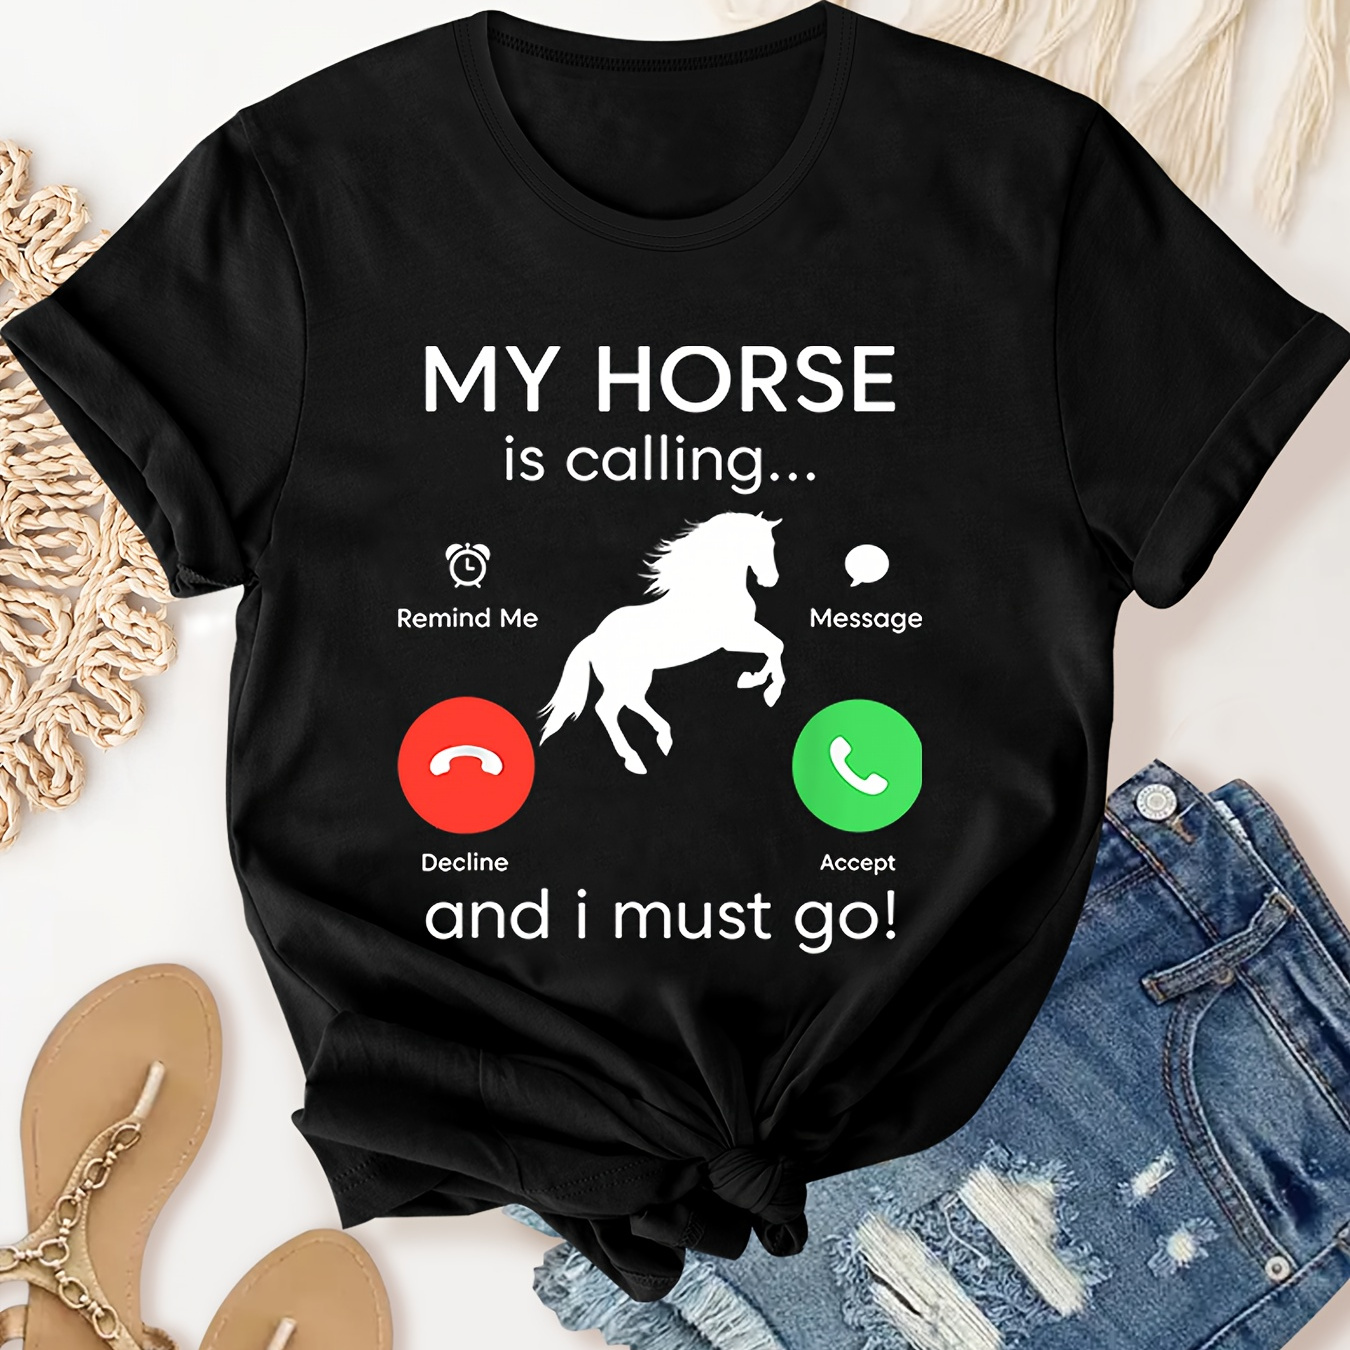 

My Horse Is Calling Me I Have To Go Print Graphic Round Neck Sports Tee, Short Sleeves Casual Workout T-shirt Top, Women's Activewear